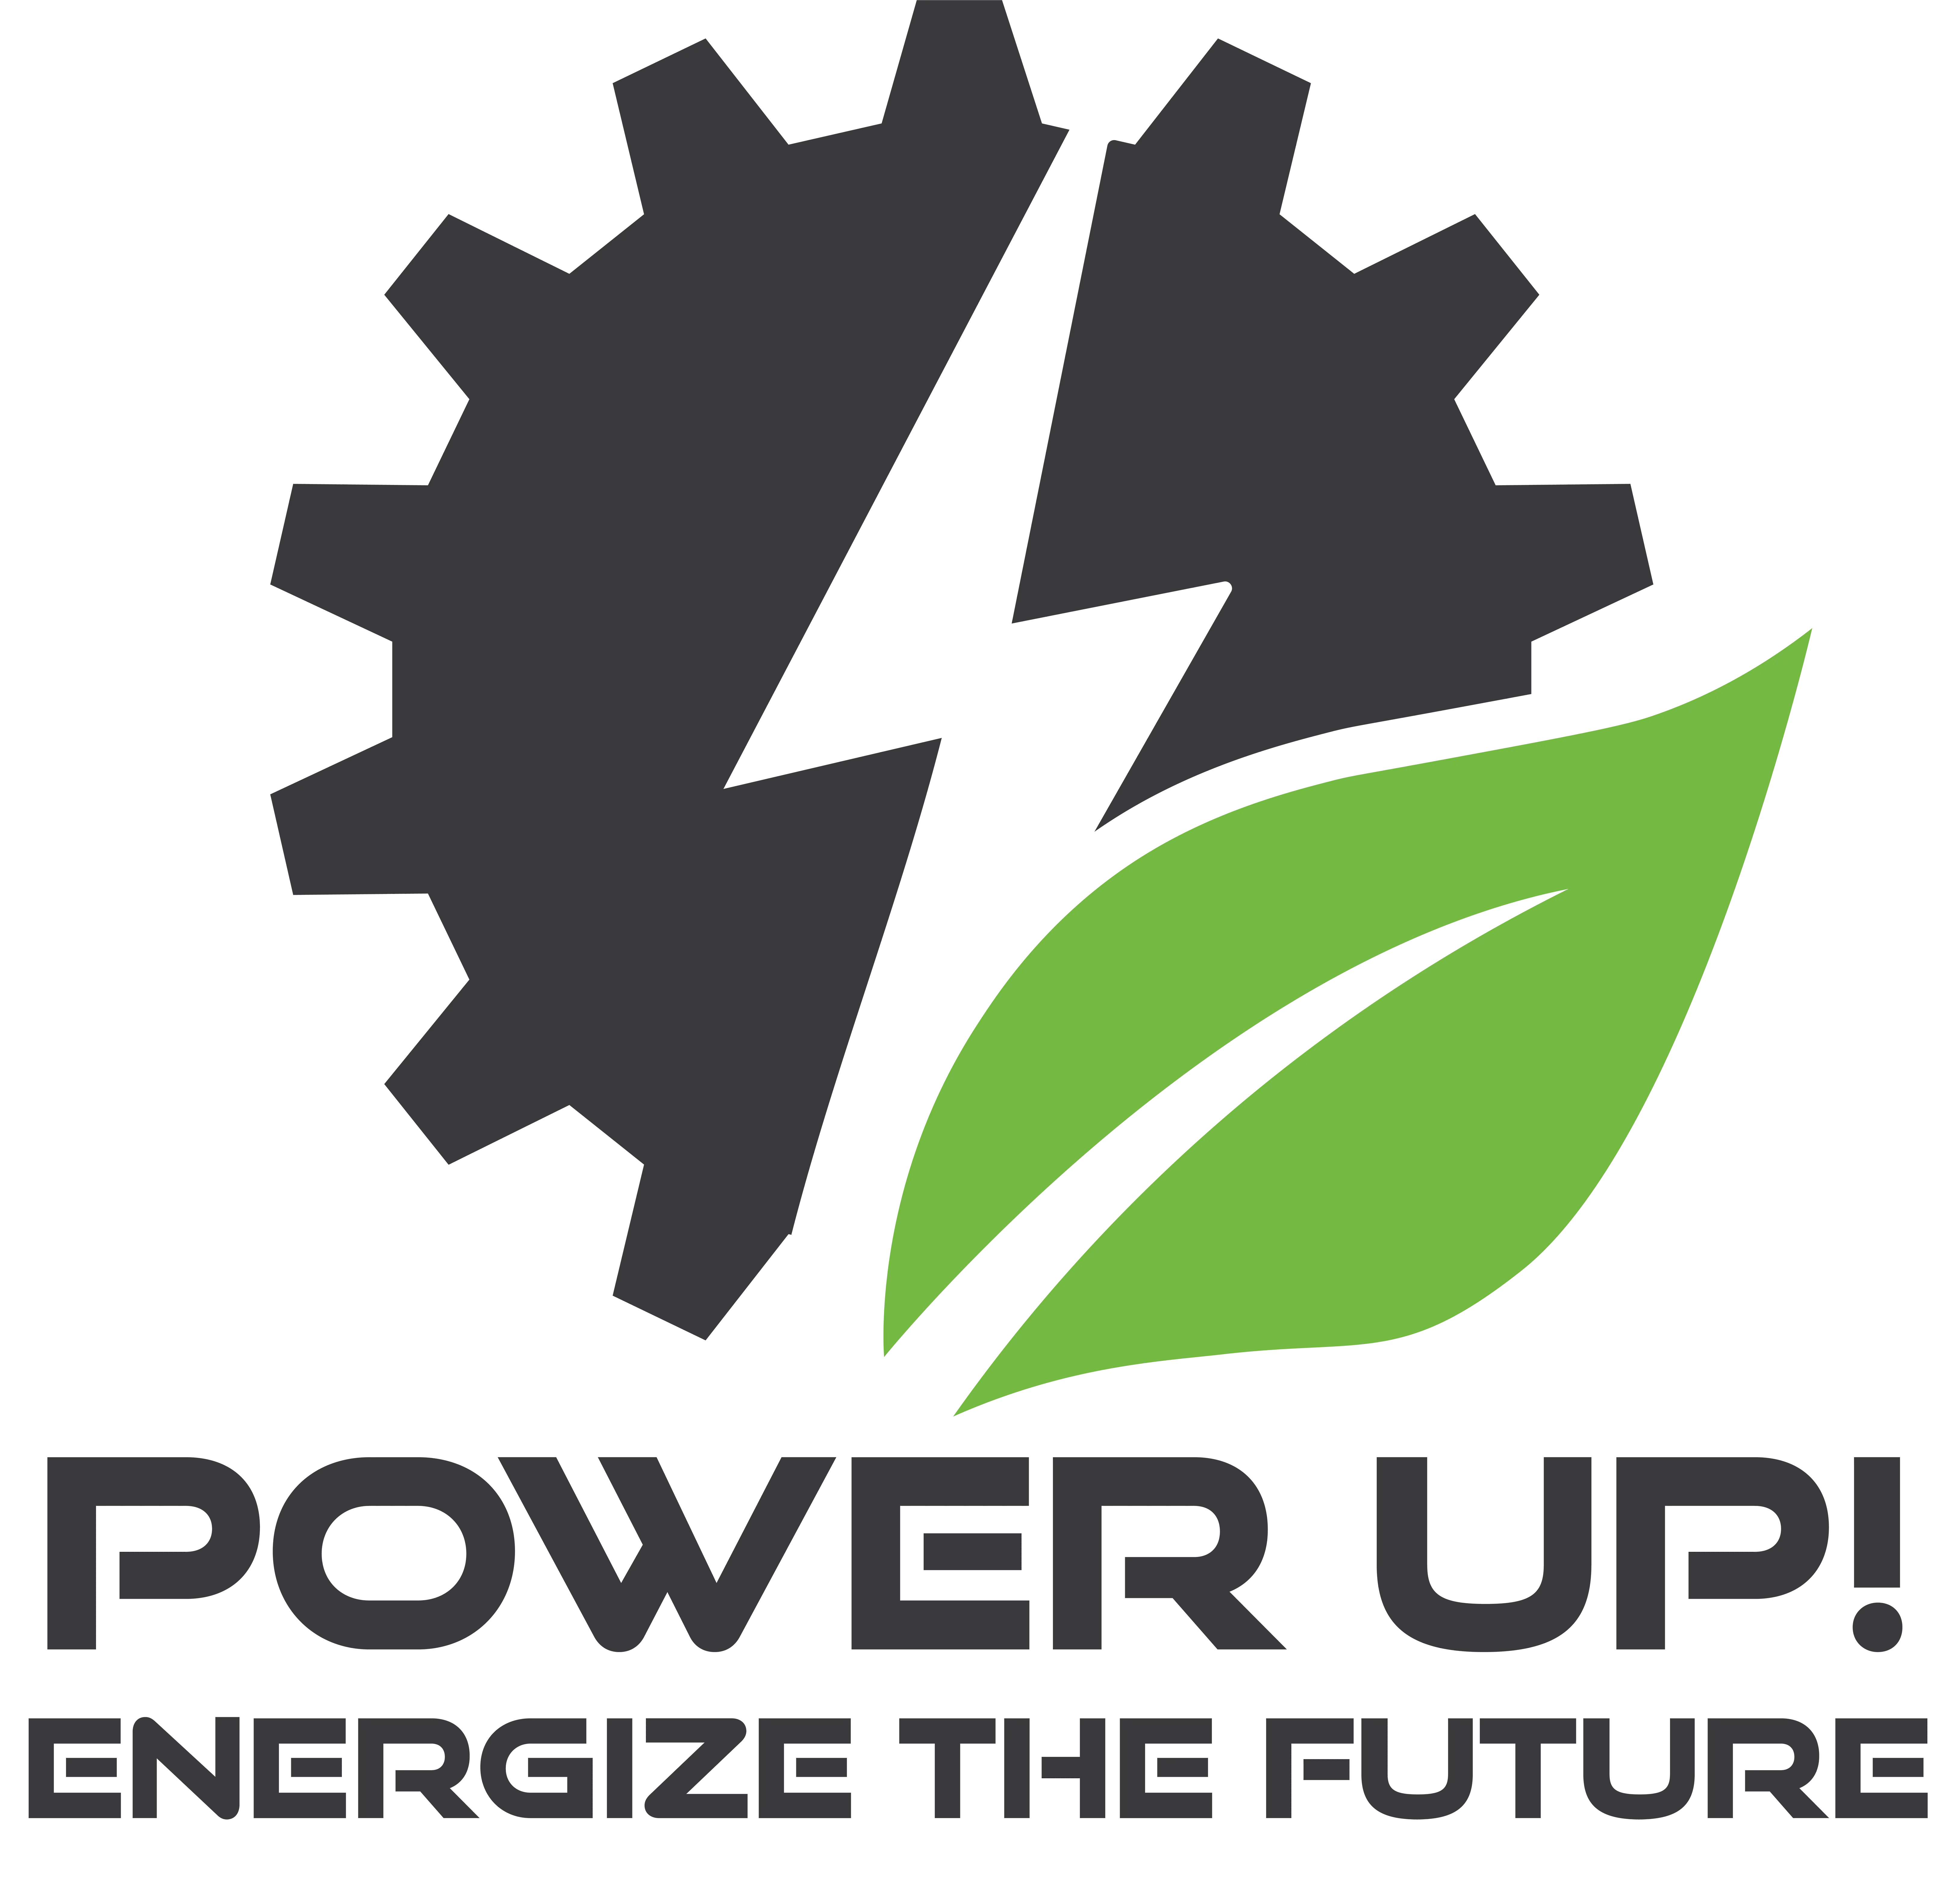 Power Up! - Energize the Future